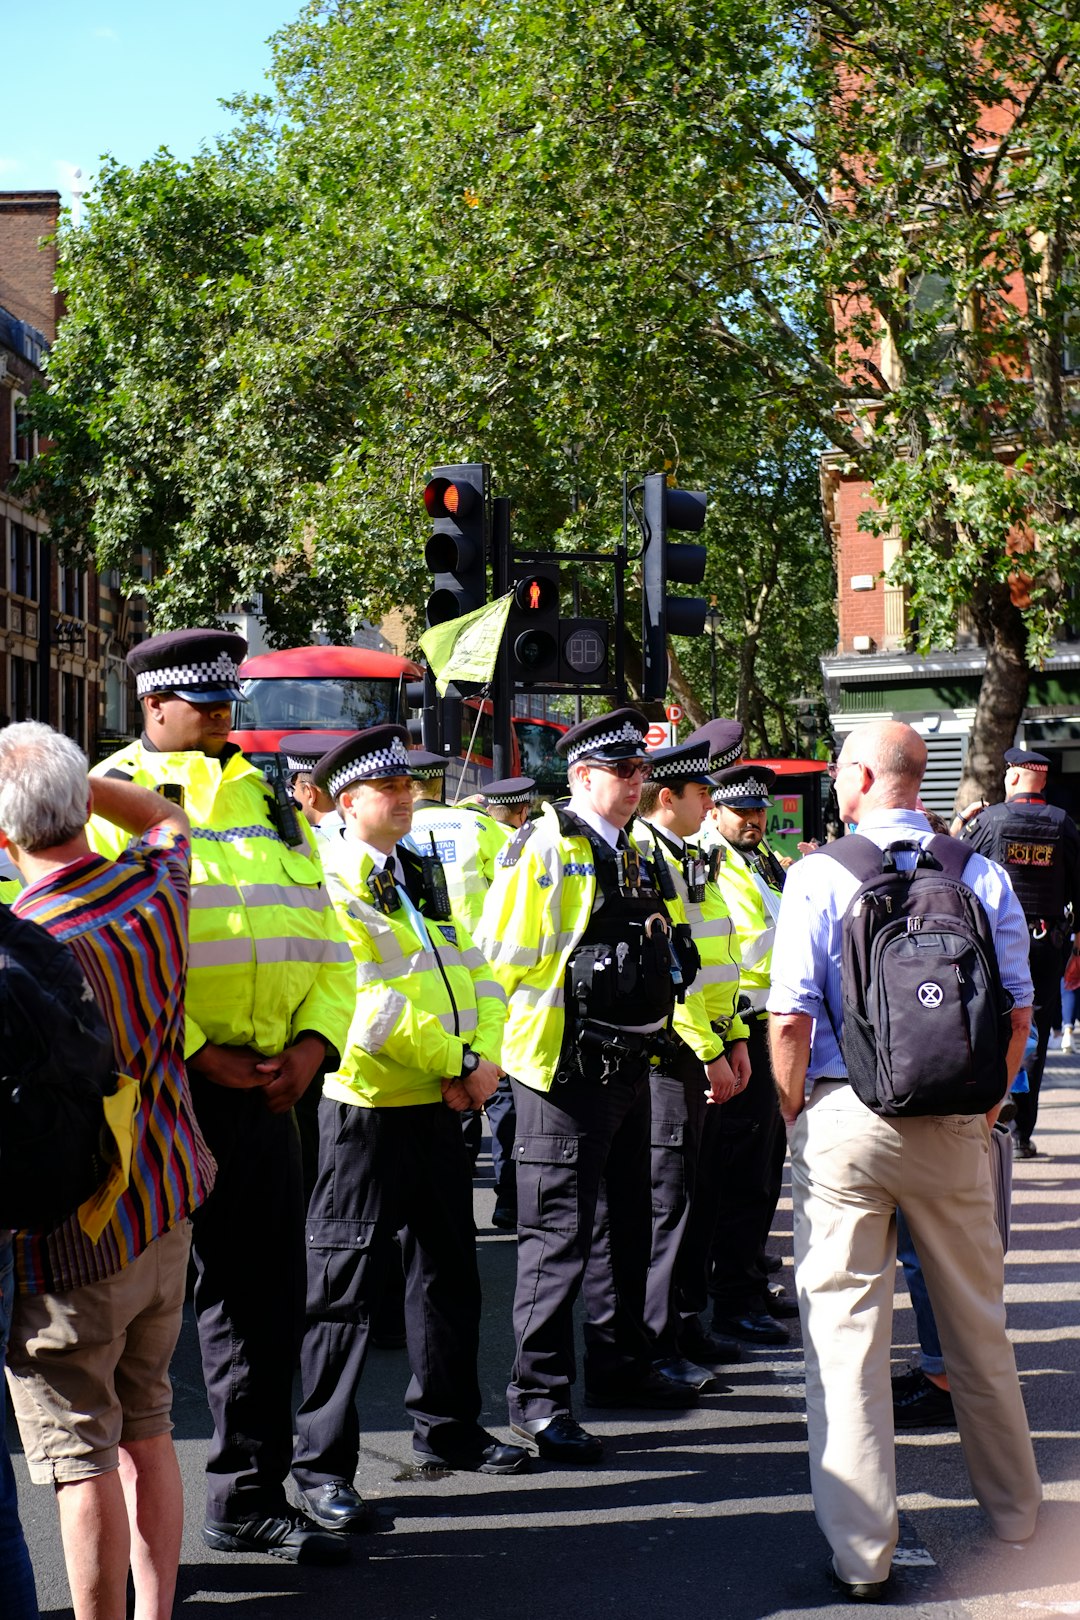 group of people in green safety vest standing on street during daytime